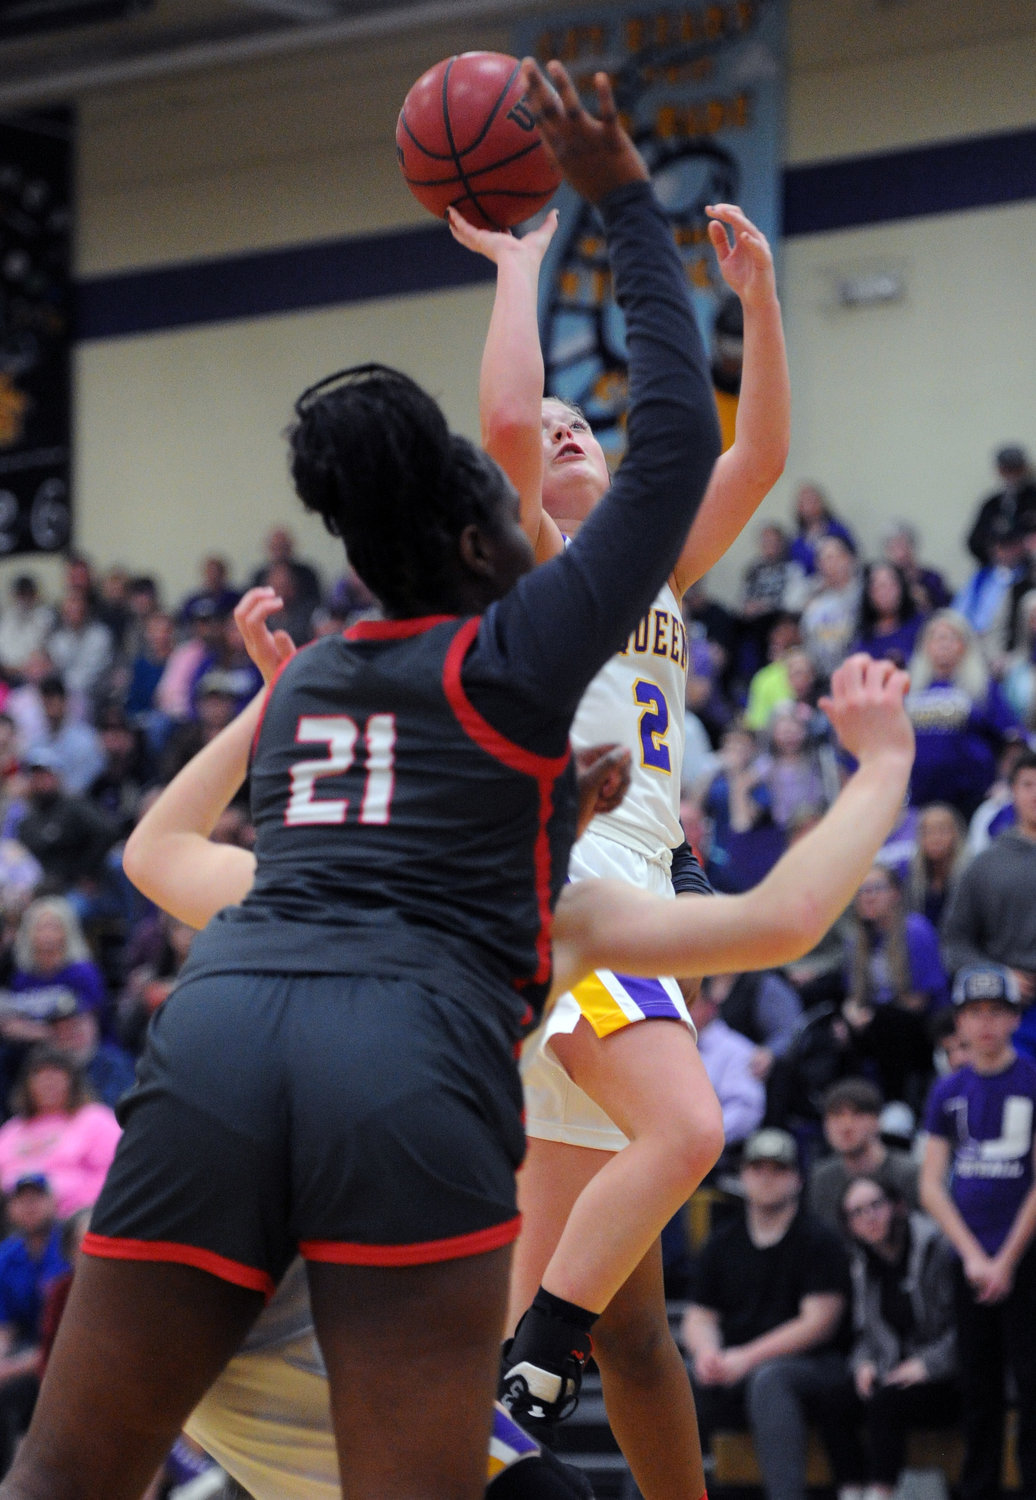 Zoey Dixon pulls up for a shot over East Nashville’s Jayla Horton and scores in the third quarter.